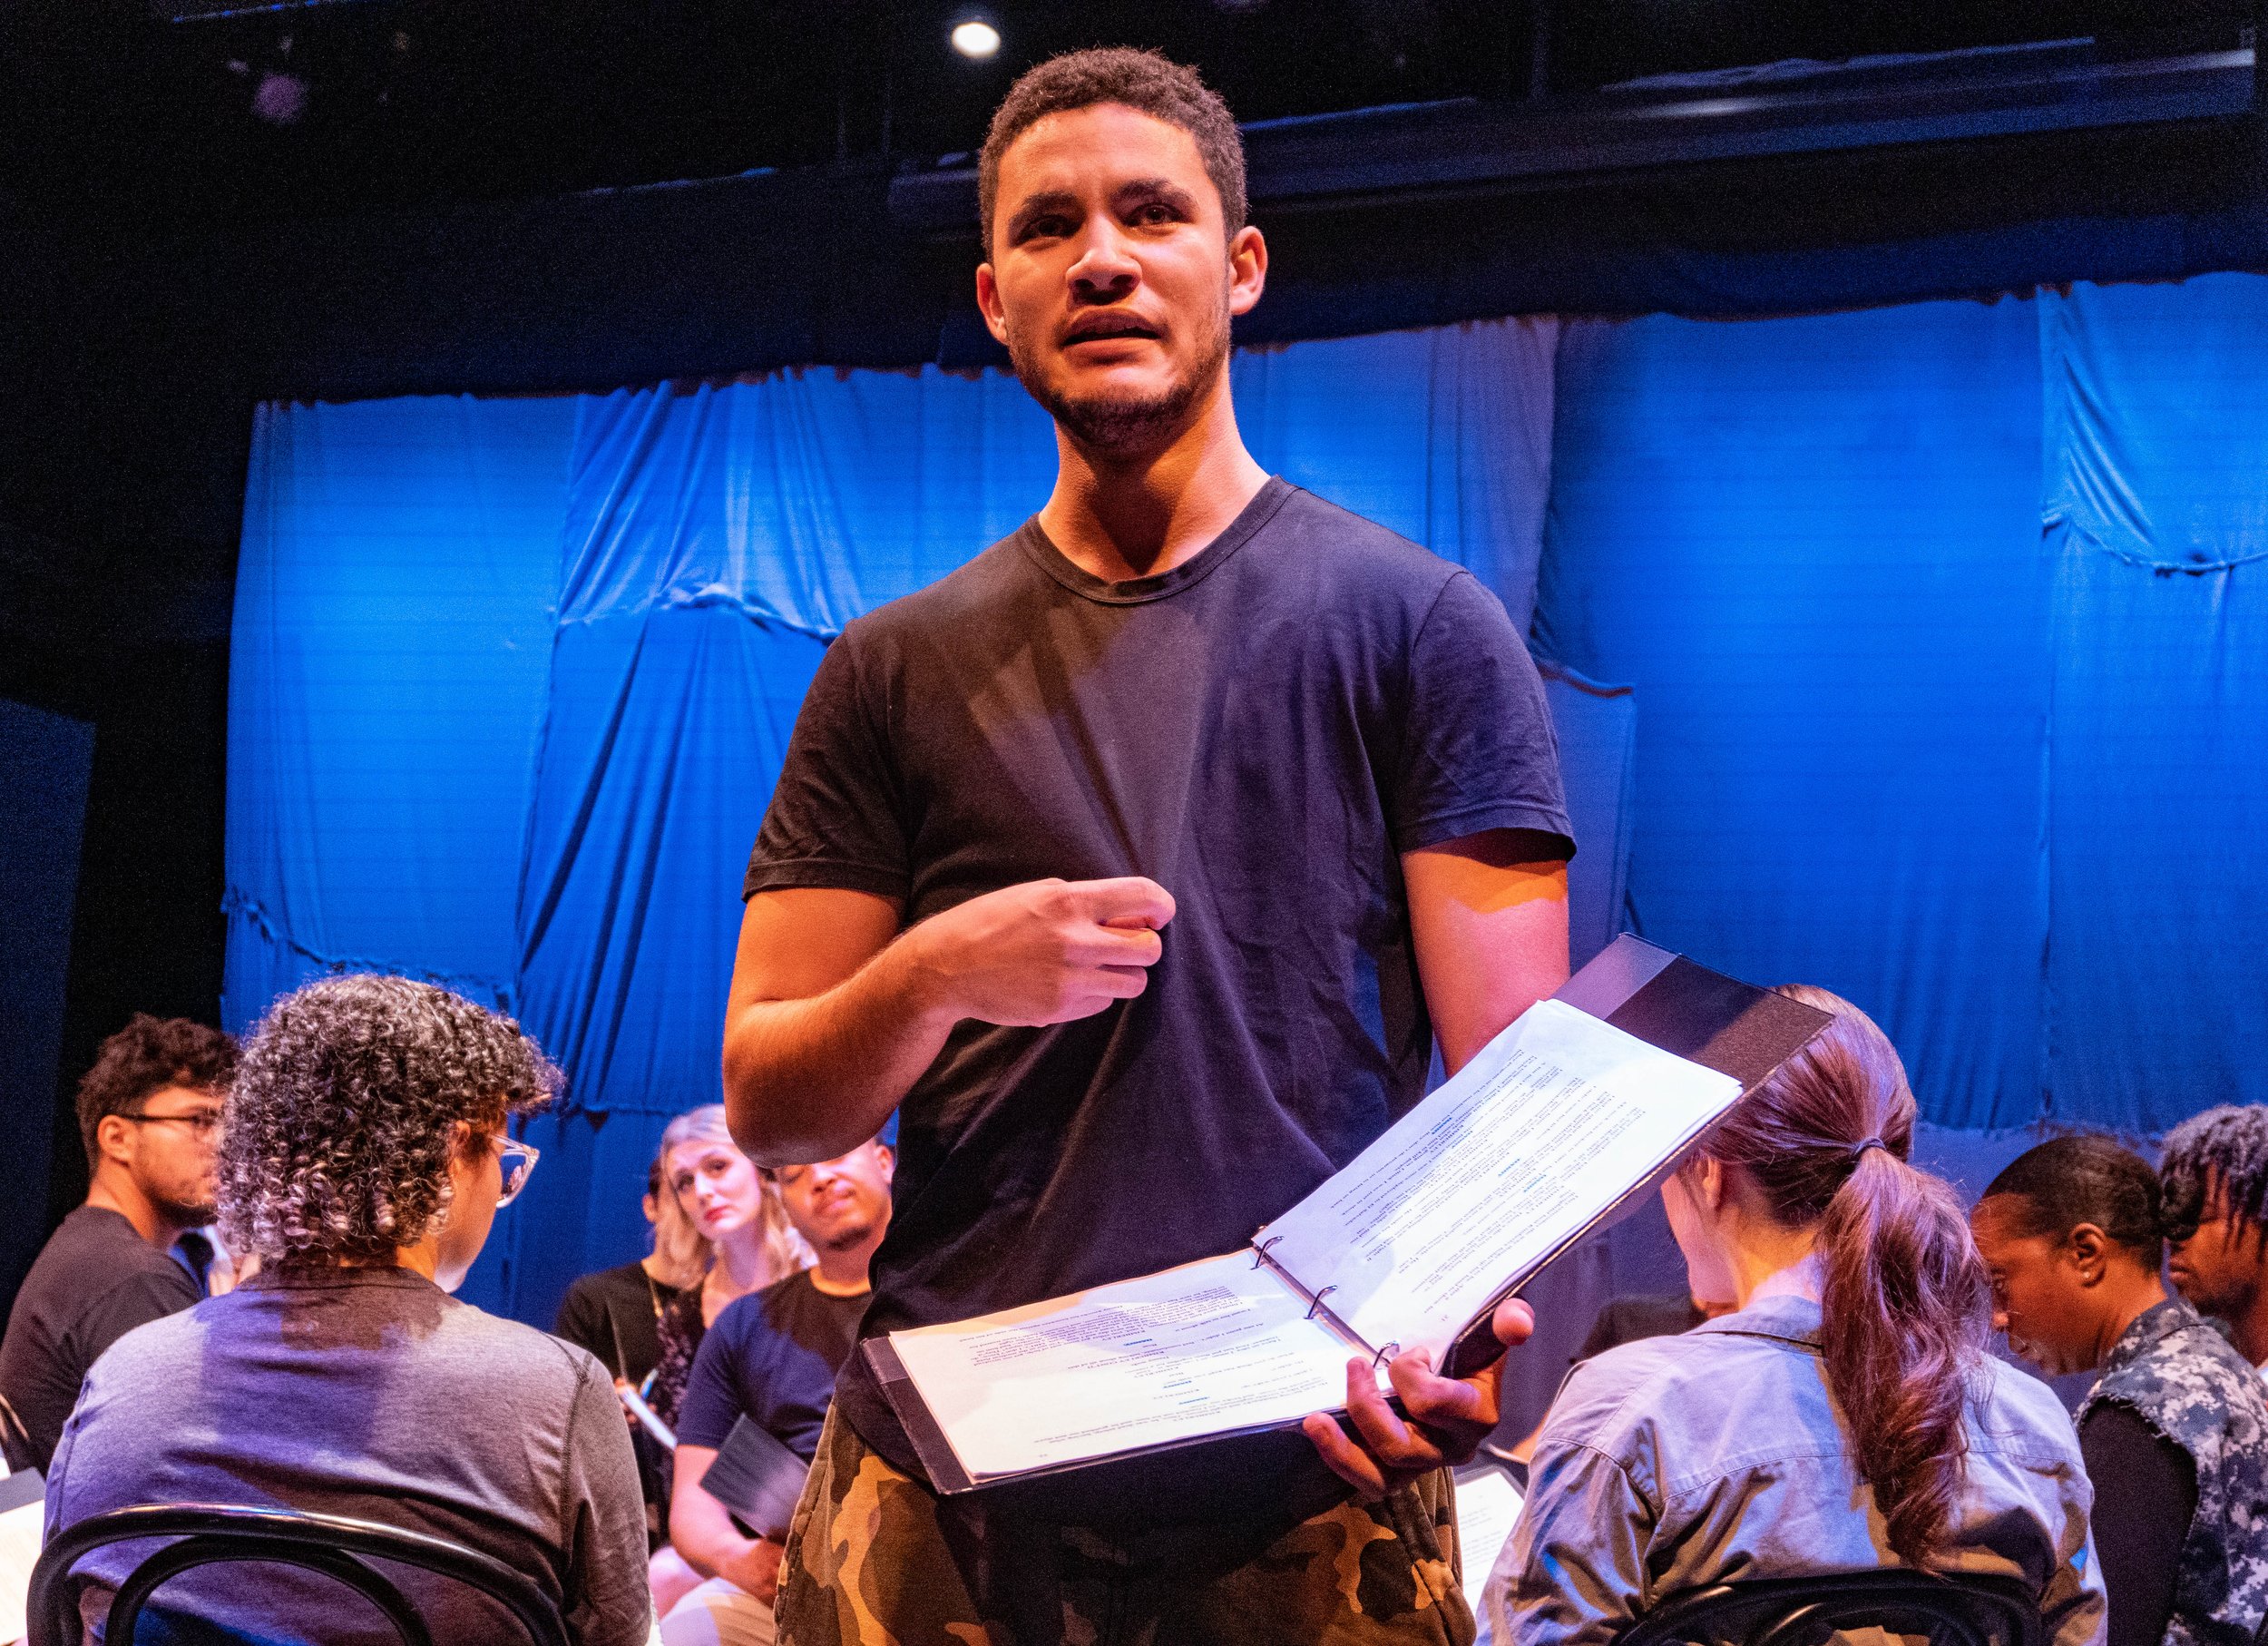  Christopher Pina delivers an emotional performance as Danny, a veteran battling PTSD in War Words. War Words is a play written by Michelle Kholos Brooks and is part of a national initiative to honor veterans through theatrical storytelling. The play